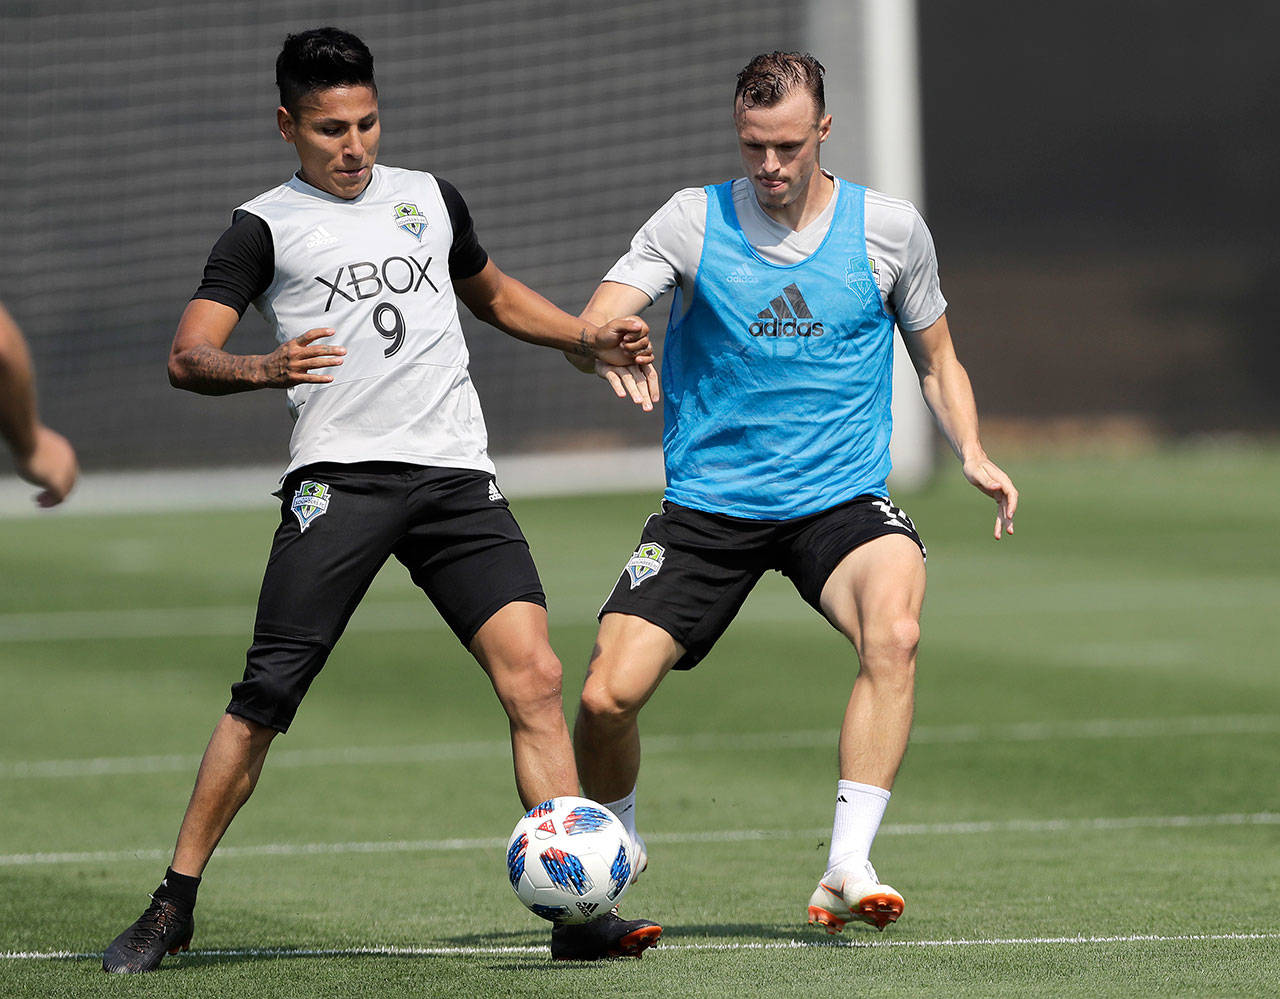 Seattle’s Brad Smith (right) defends Raul Ruidiaz (9) during a Sounders training session on Aug. 8 in Tukwila. Smith was acquired on loan from Bournemouth in the English Premier League earlier this month. (AP Photo/Ted S. Warren)